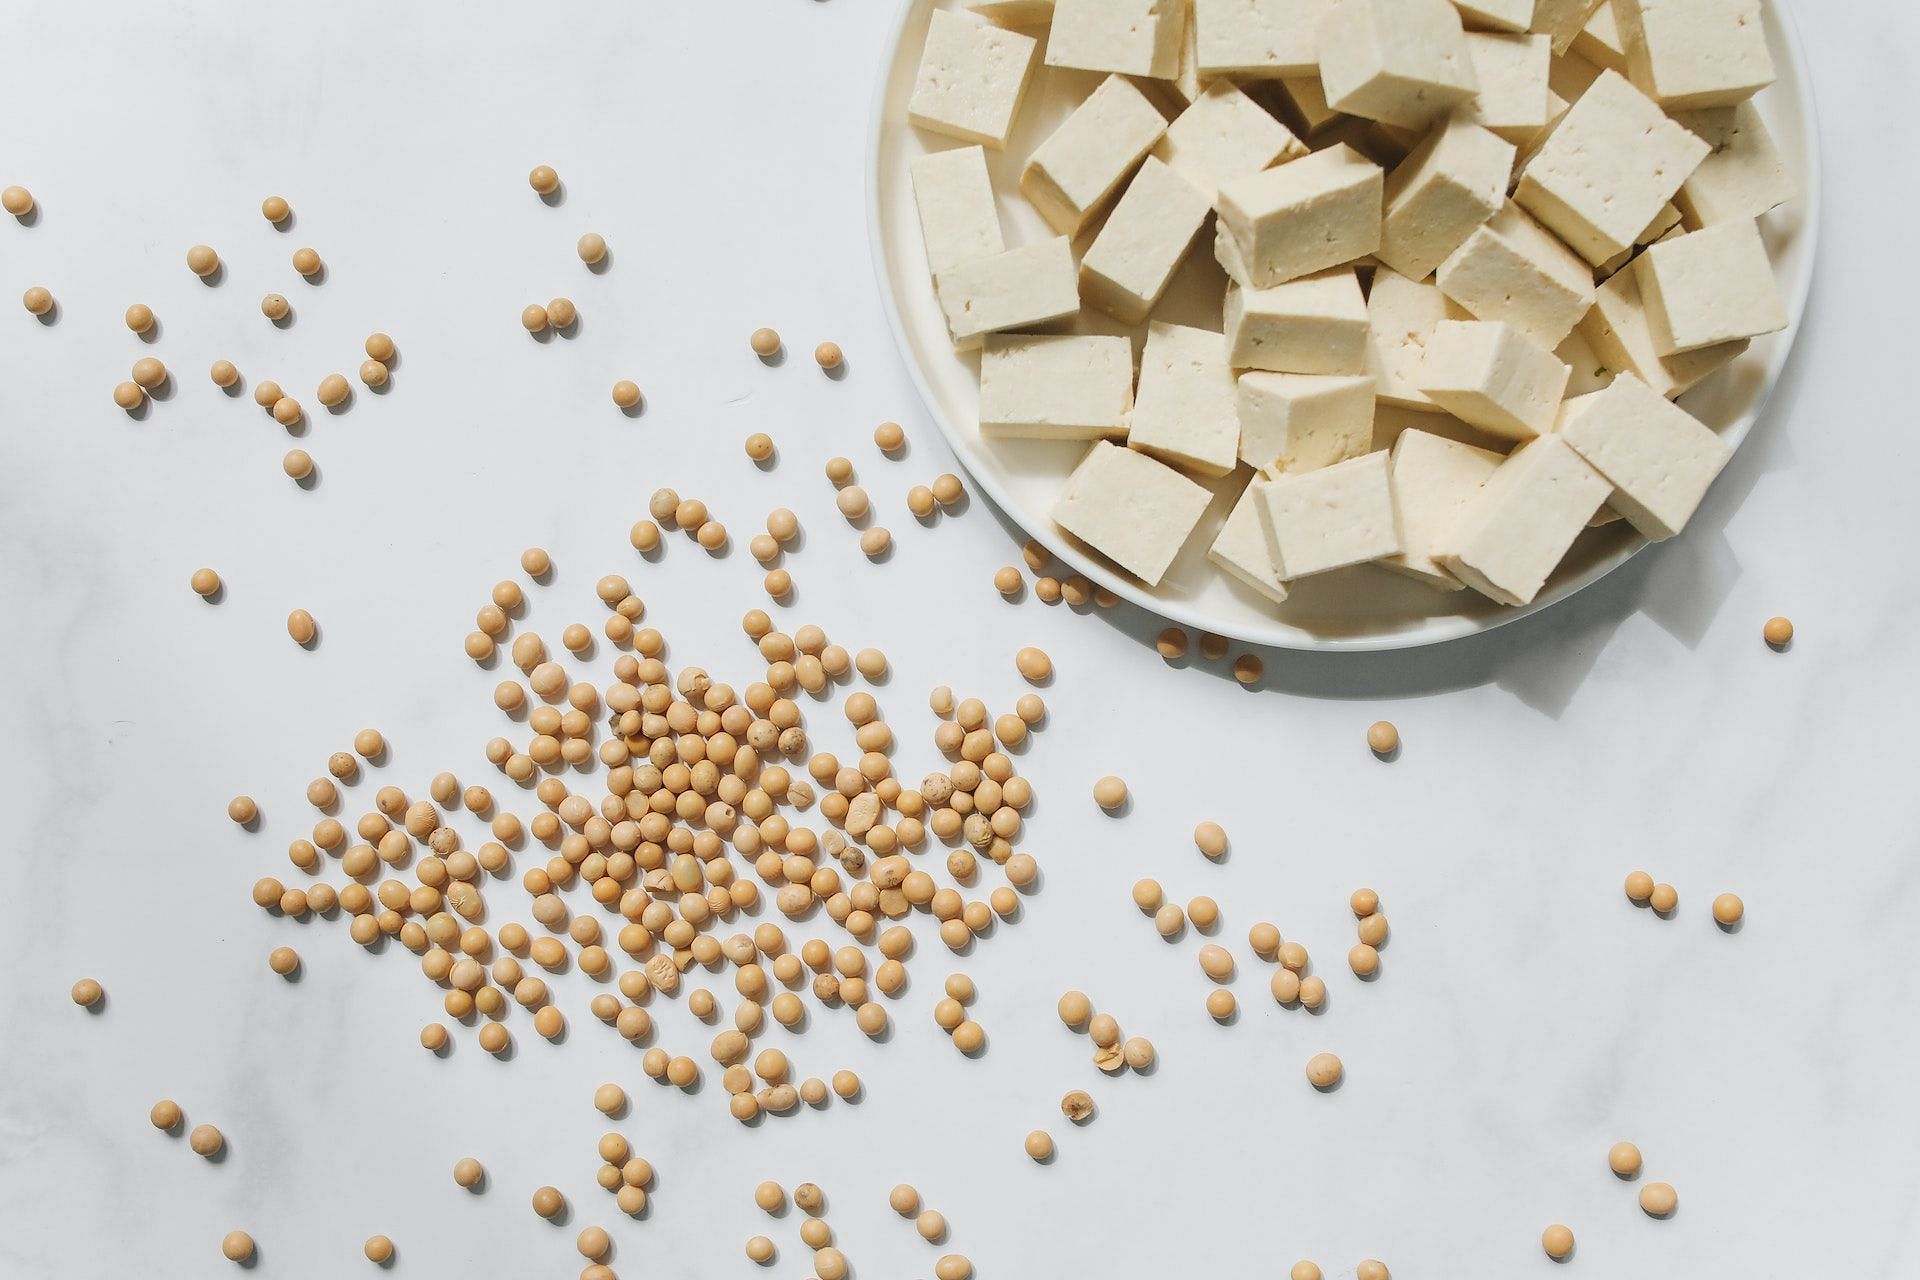 Soybeans offer the best vegetable protein. (Photo via Pexels/Polina Tankilevitch)